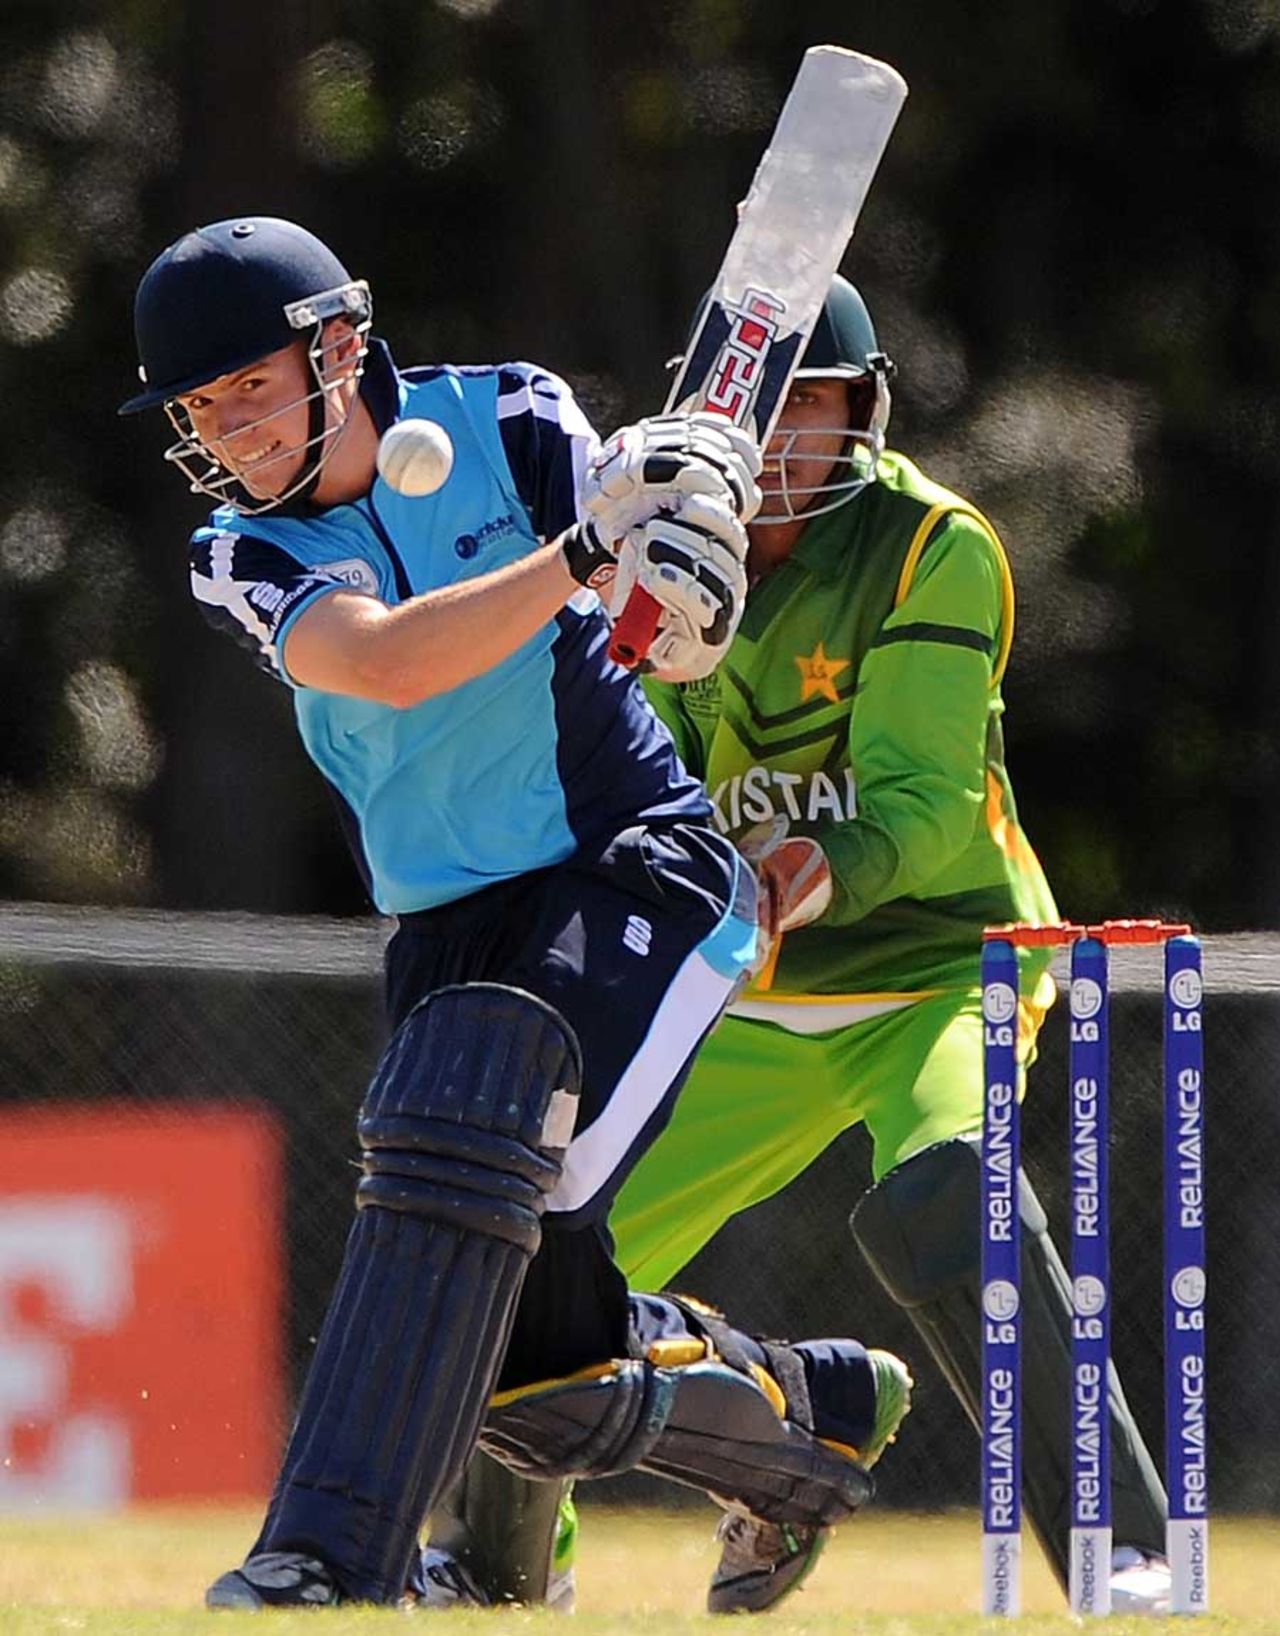 Ross McLean goes after one, Scotland v Pakistan, Group B, ICC Under-19 World Cup 2012, Buderim, August 13, 2012